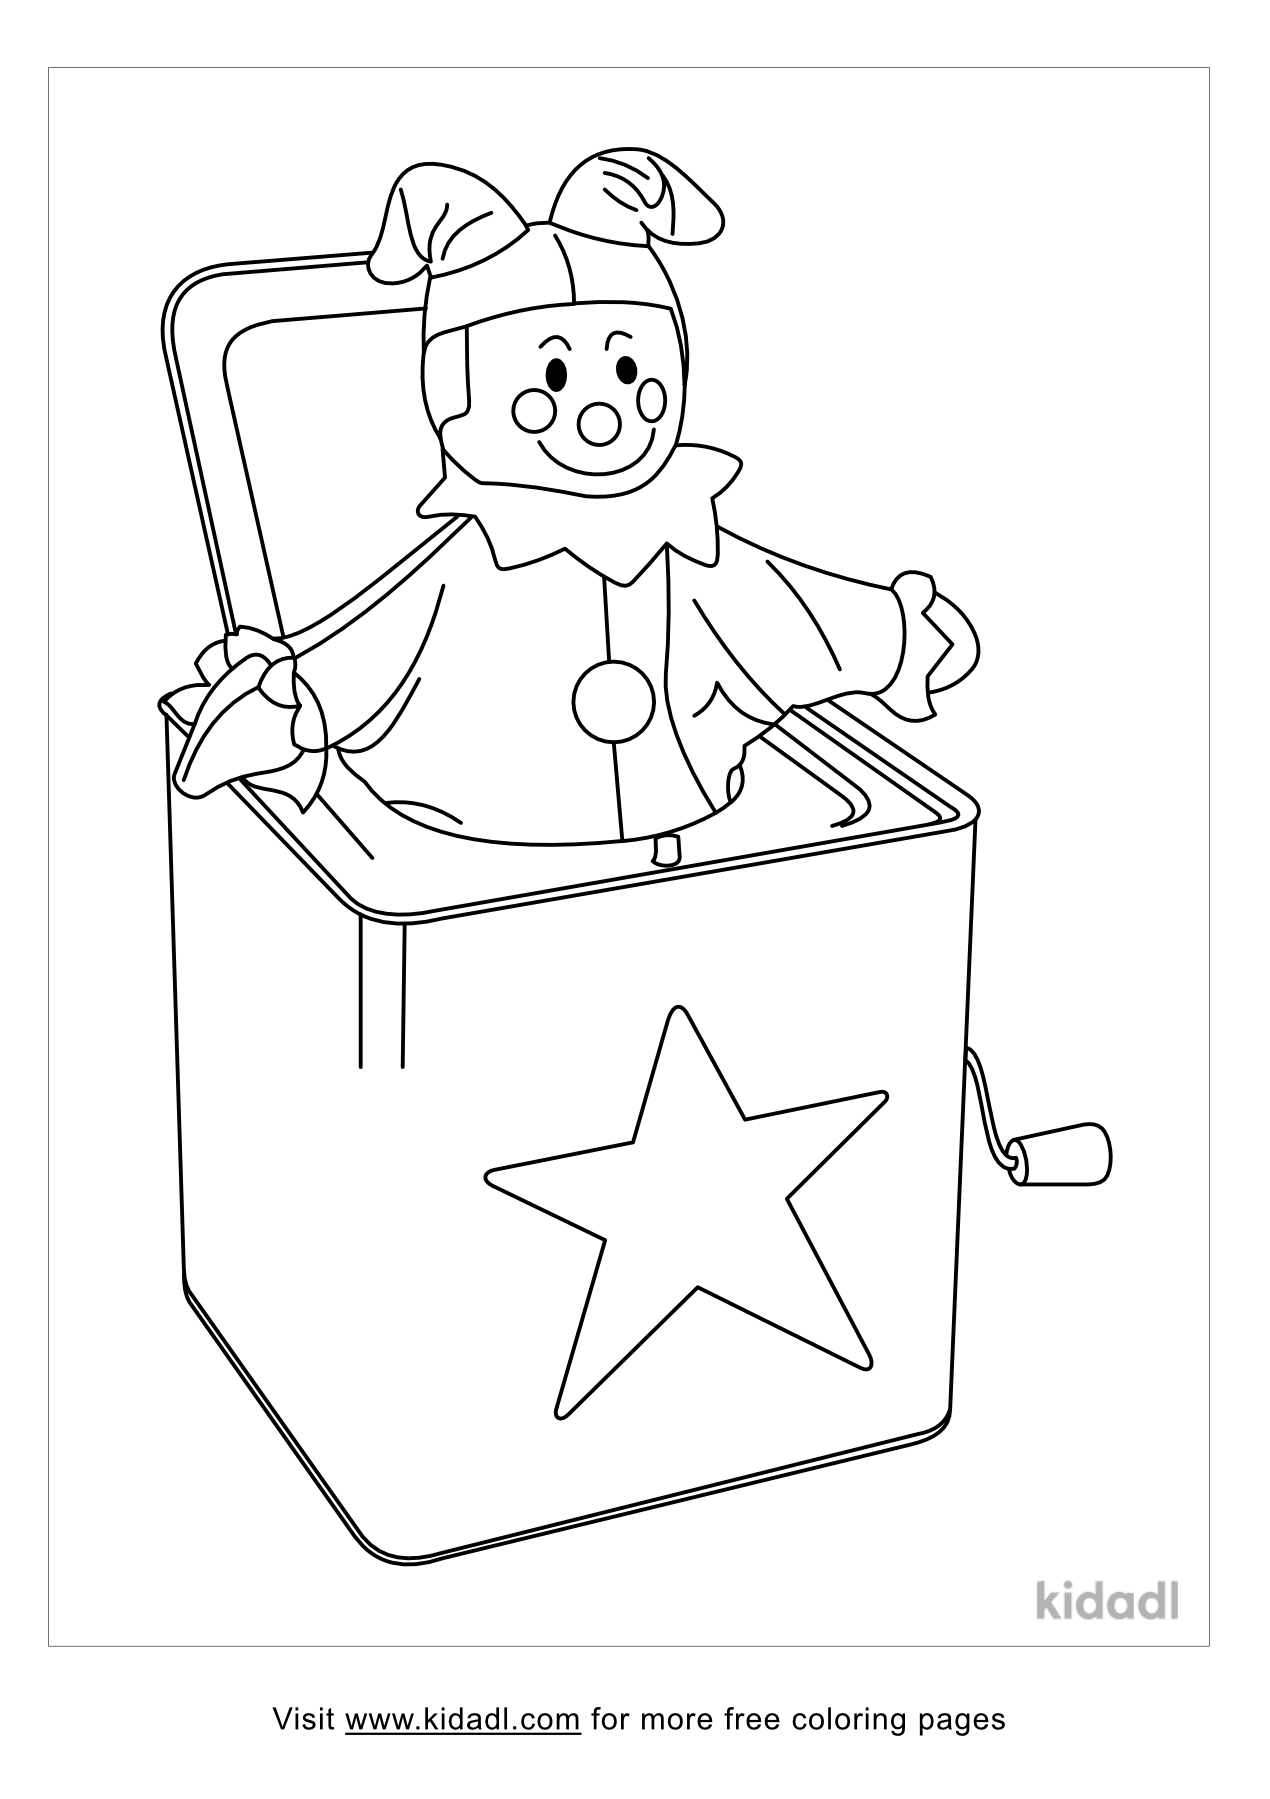 Jack In The Box Coloring Pages | Free Toys Coloring Pages | Kidadl